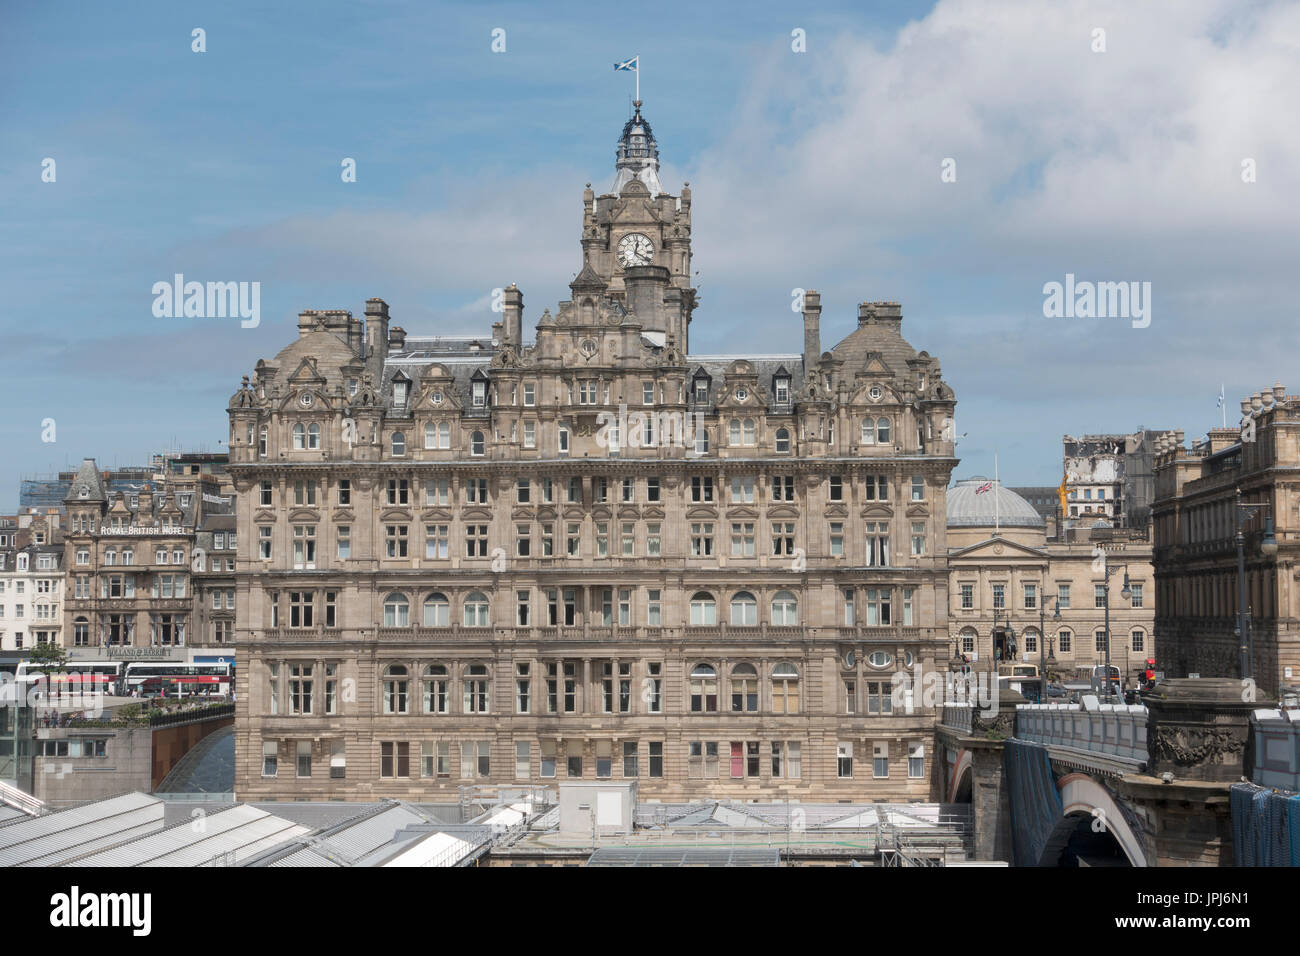 The Balmoral Hotel Seen From Old Town Edinburgh, Across The Roof Of Waverley Station Scotland, Stock Photo